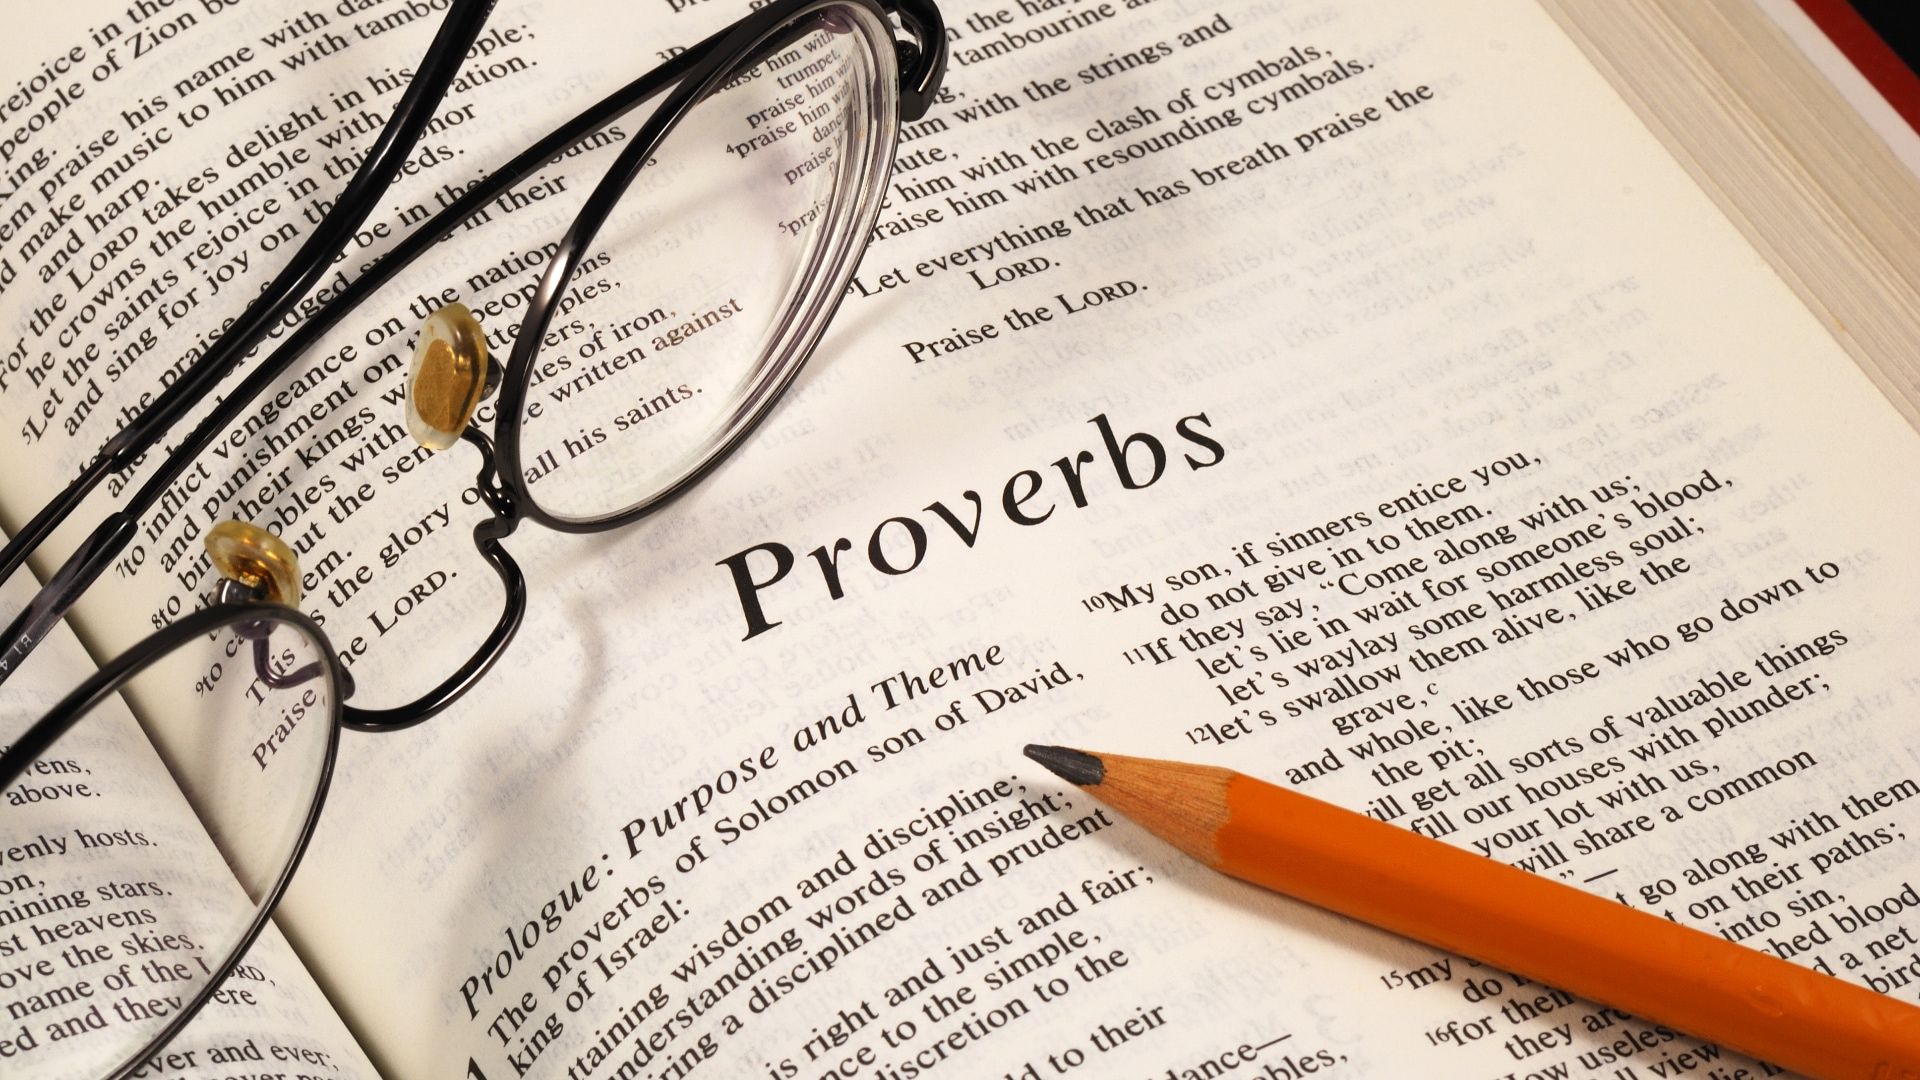 How to Live Well (Proverbs)